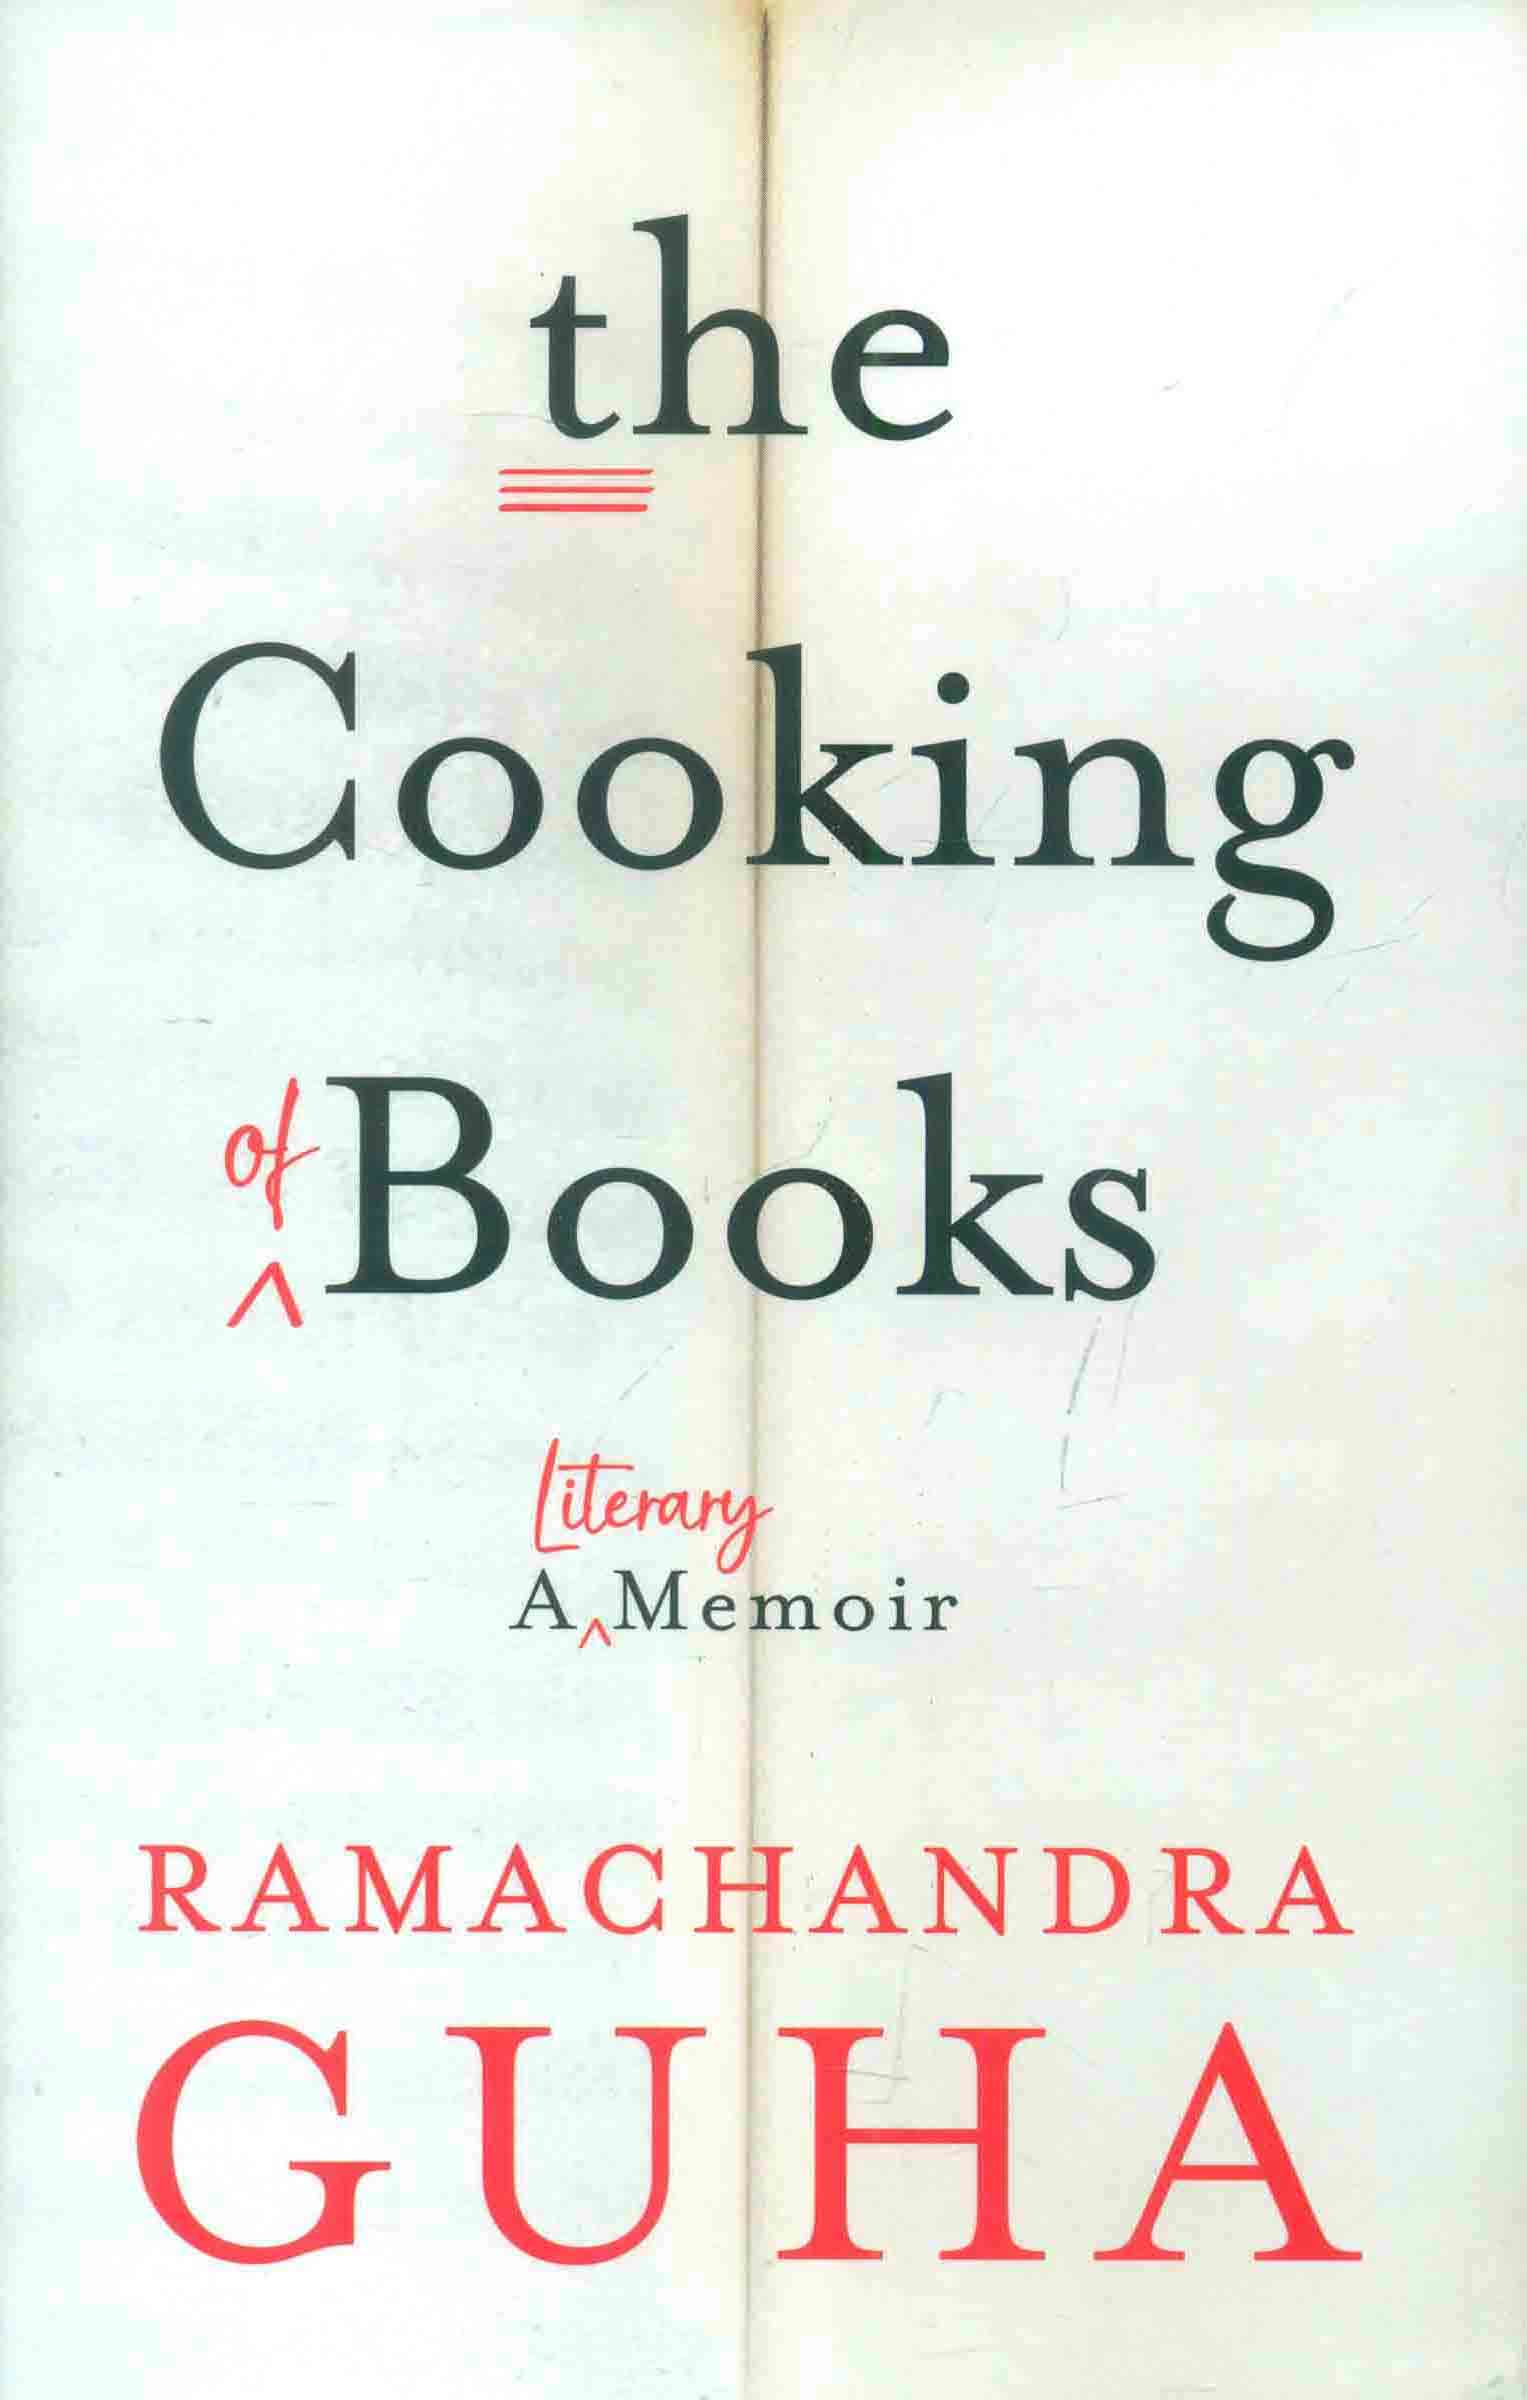 The cooking of books: a literary memoir